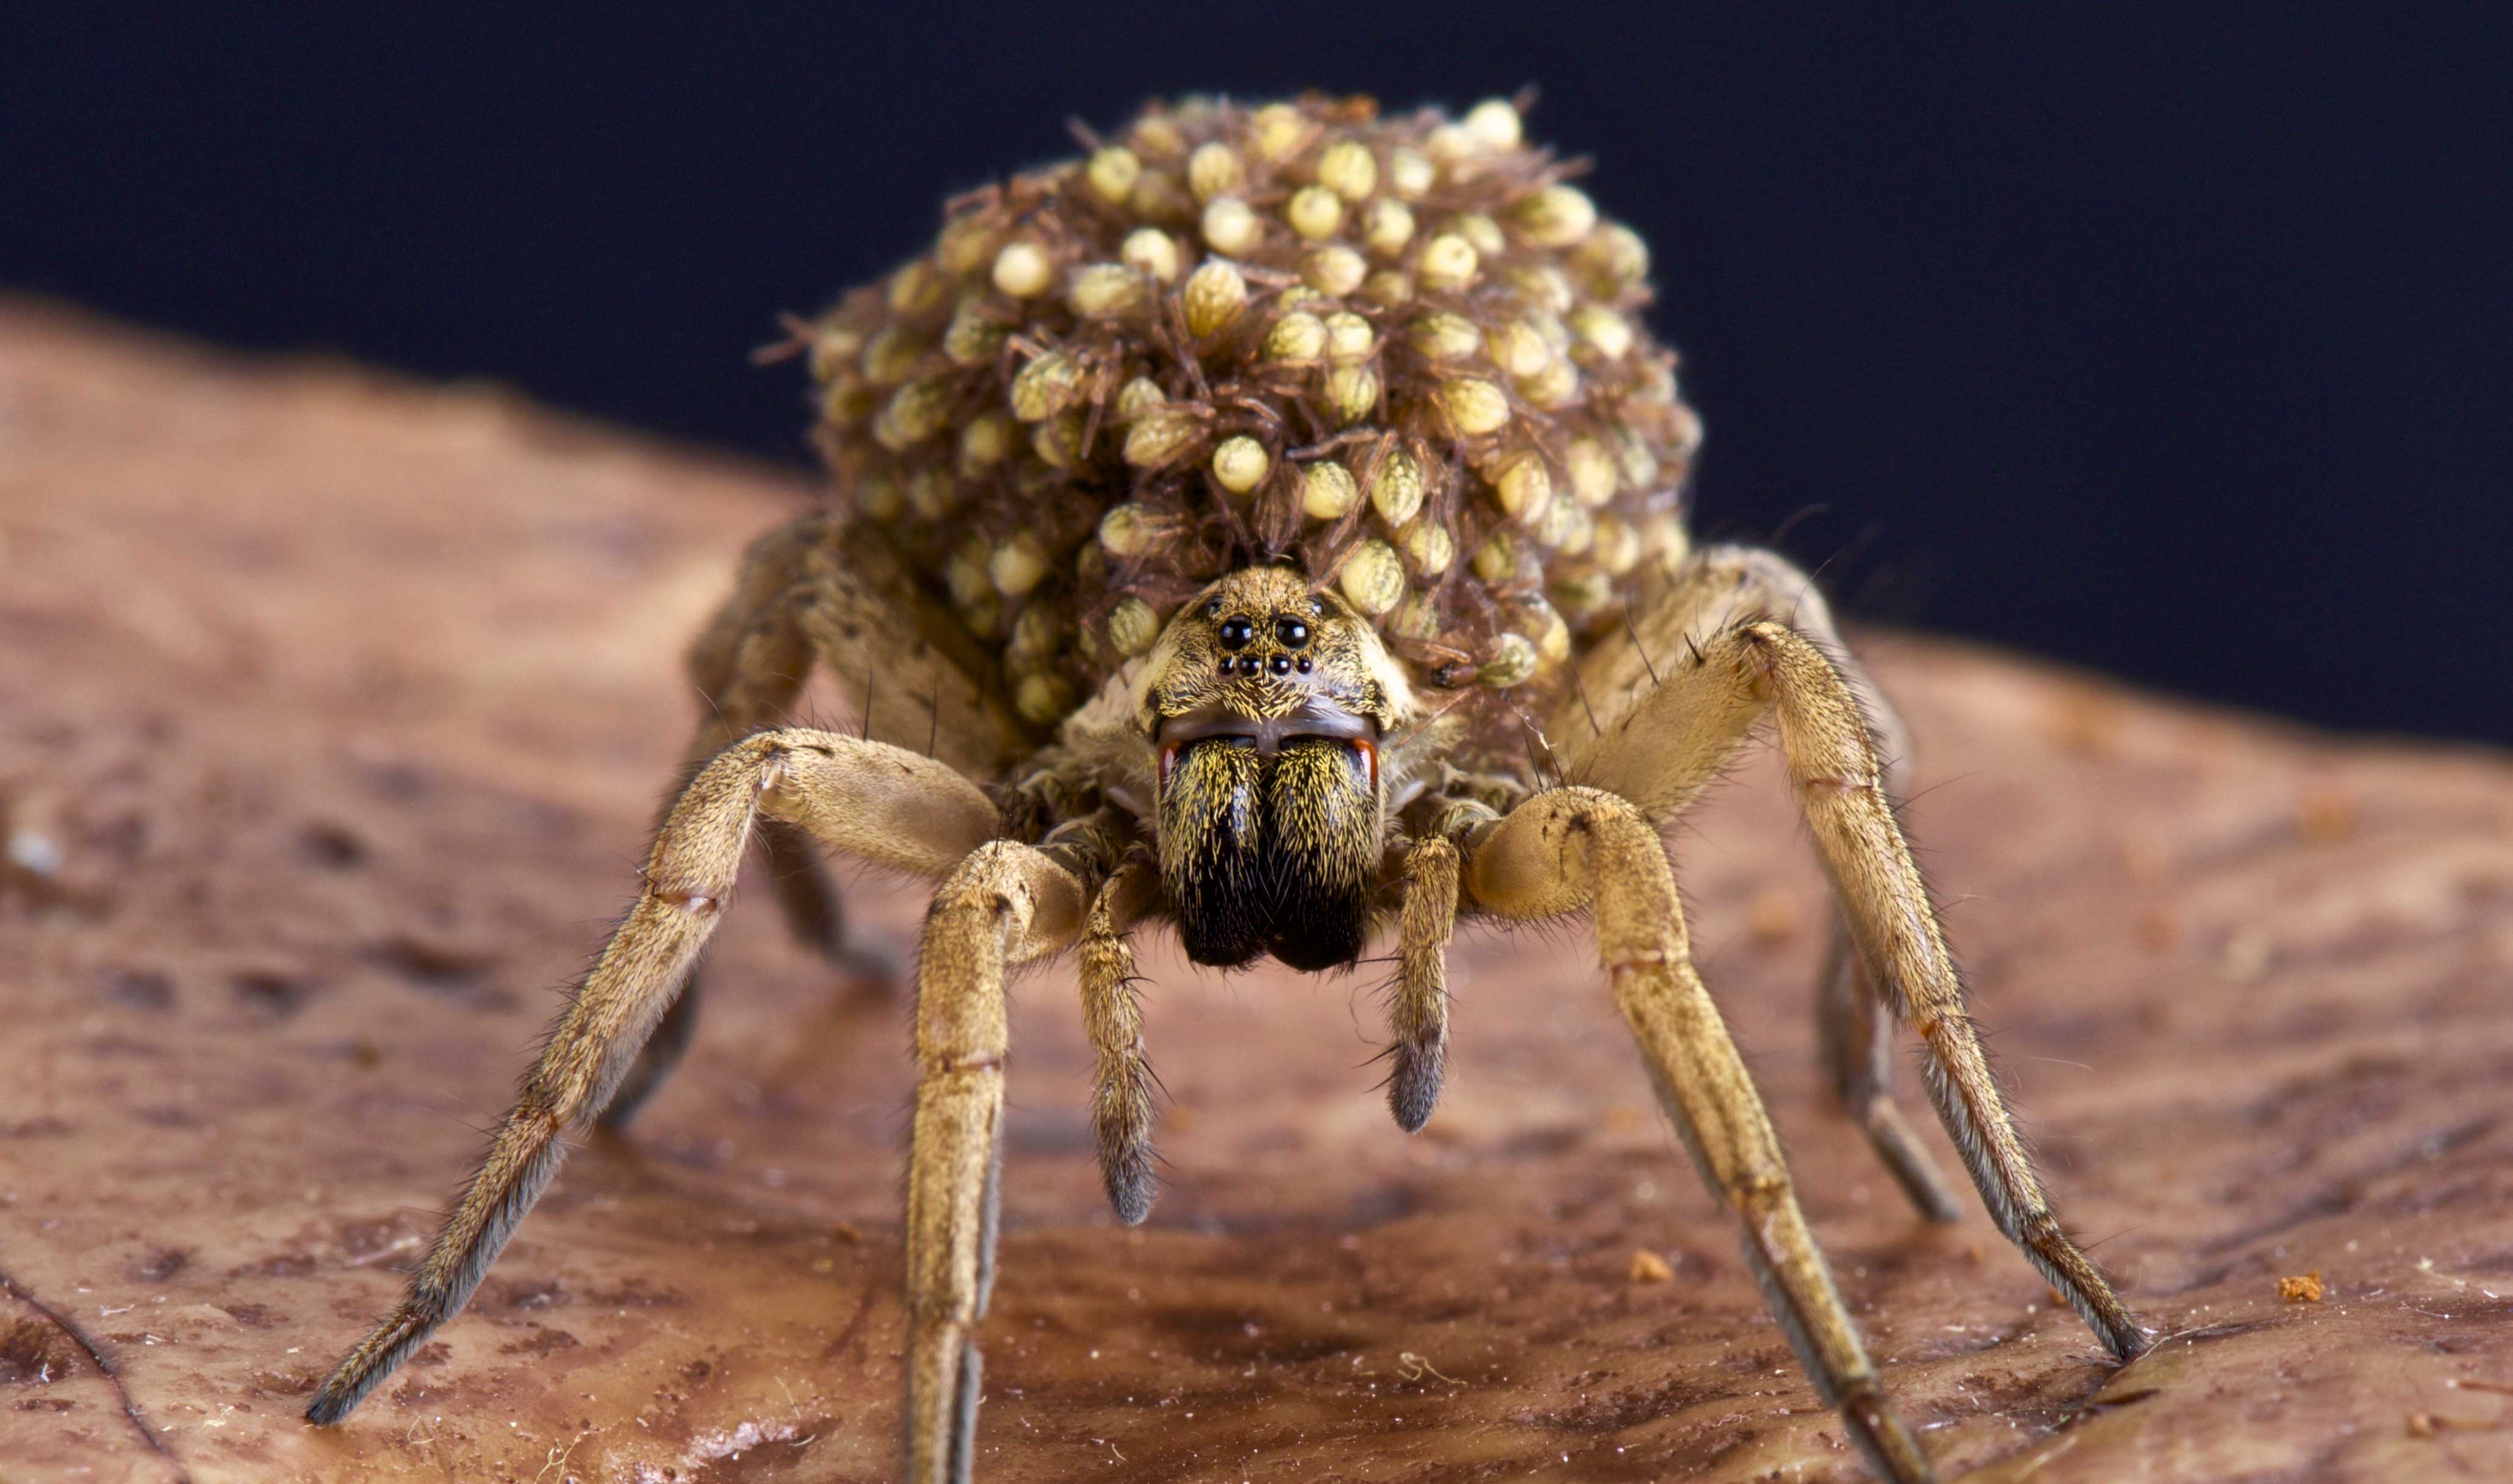 A female wolf spider carrying babies on her back.